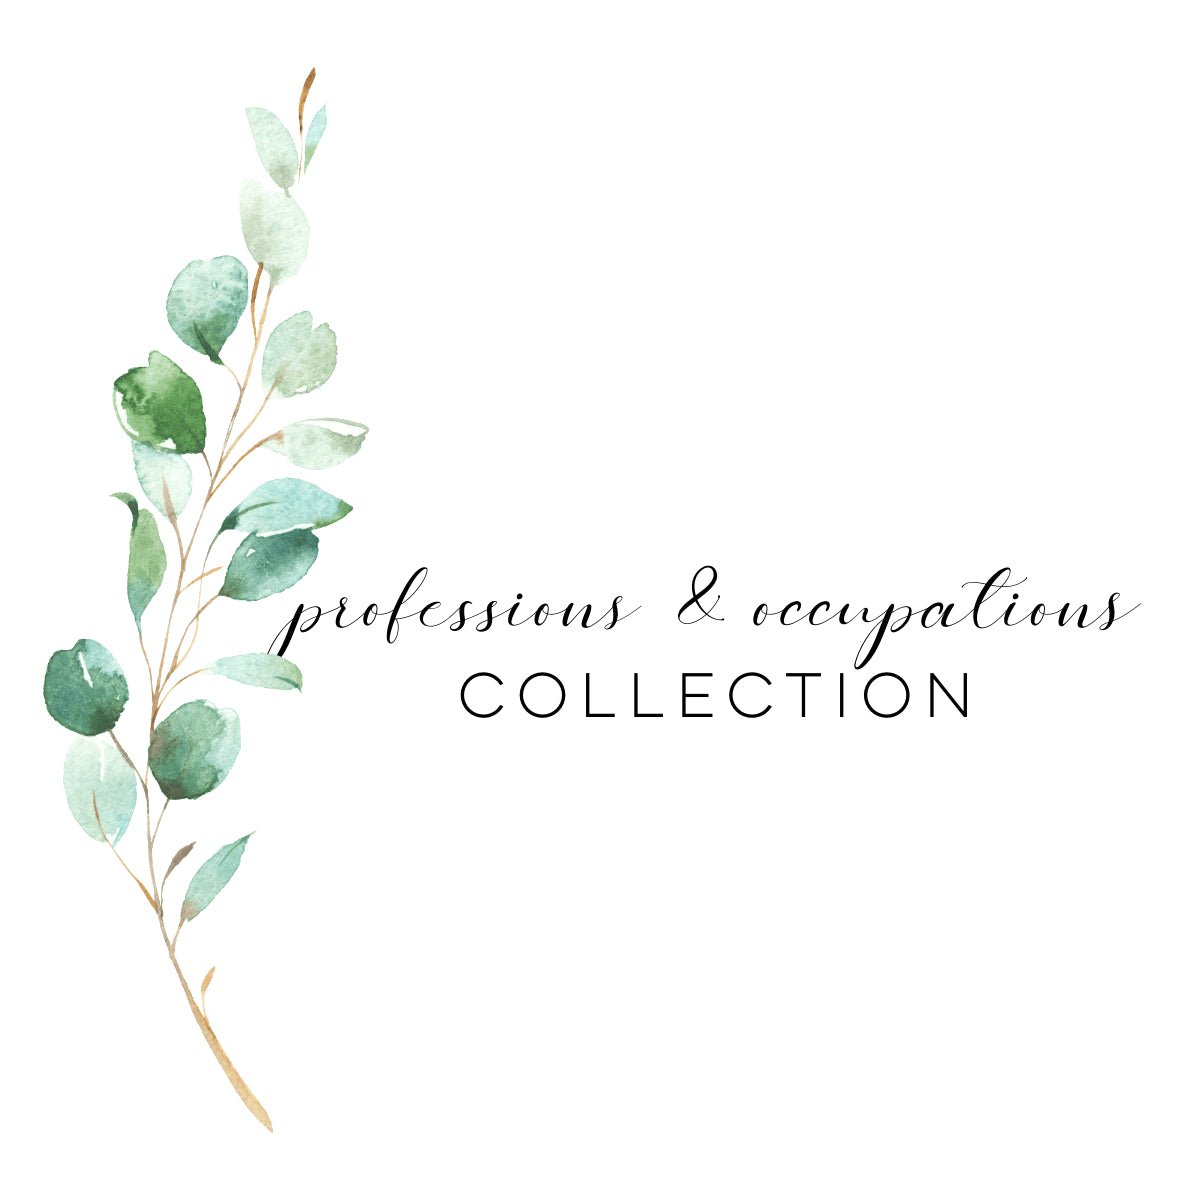 Professions & Occupations Collection